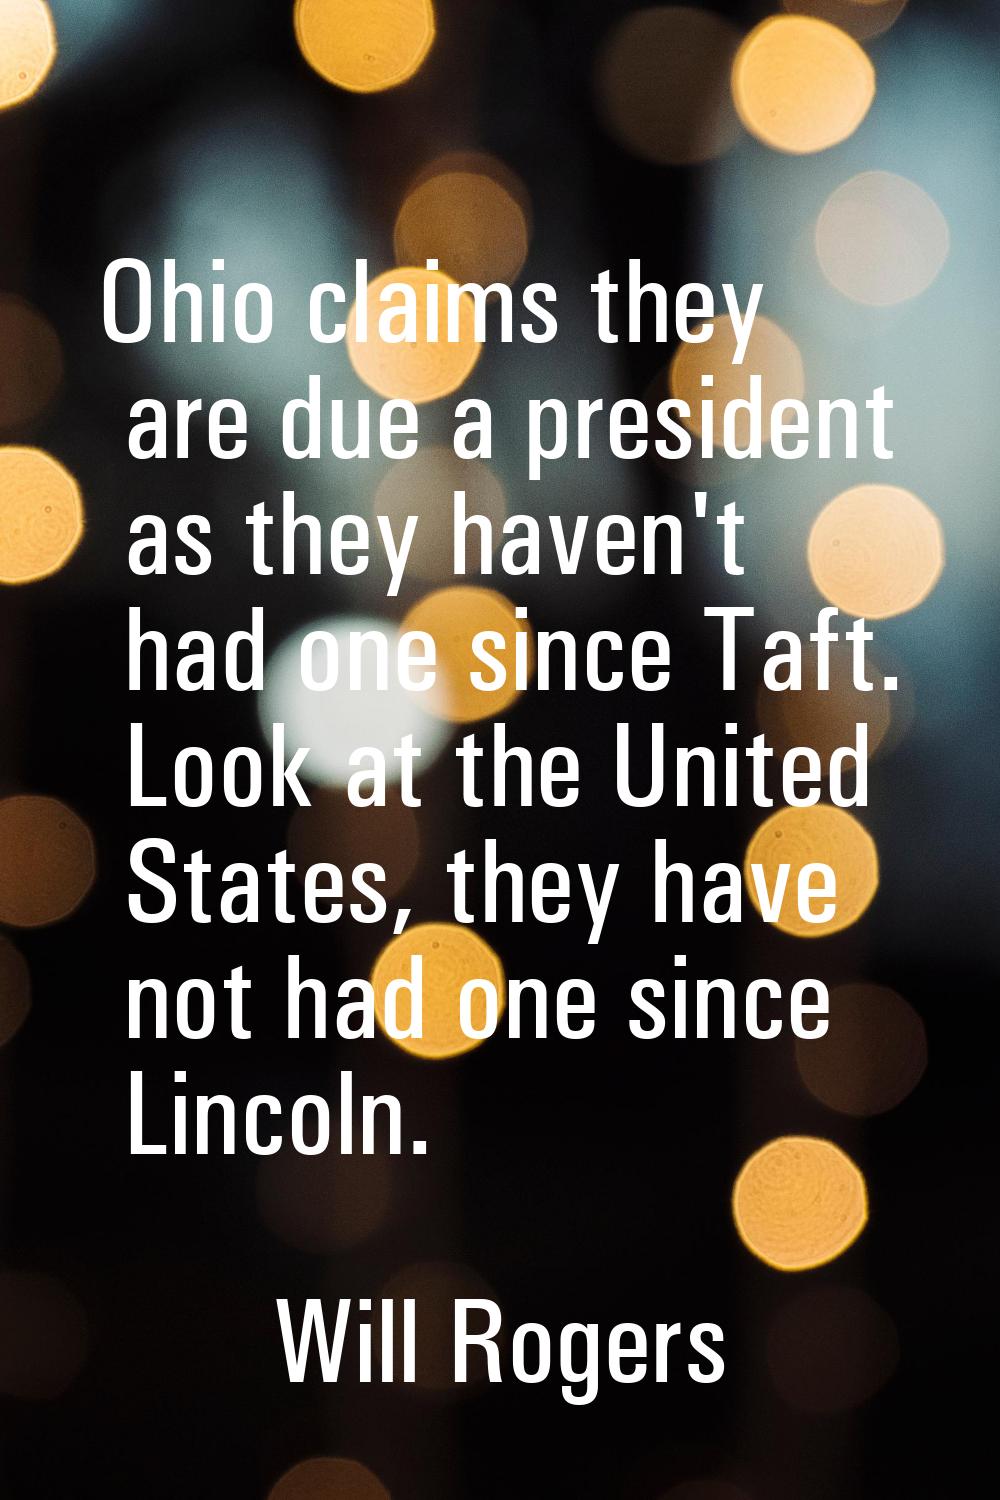 Ohio claims they are due a president as they haven't had one since Taft. Look at the United States,